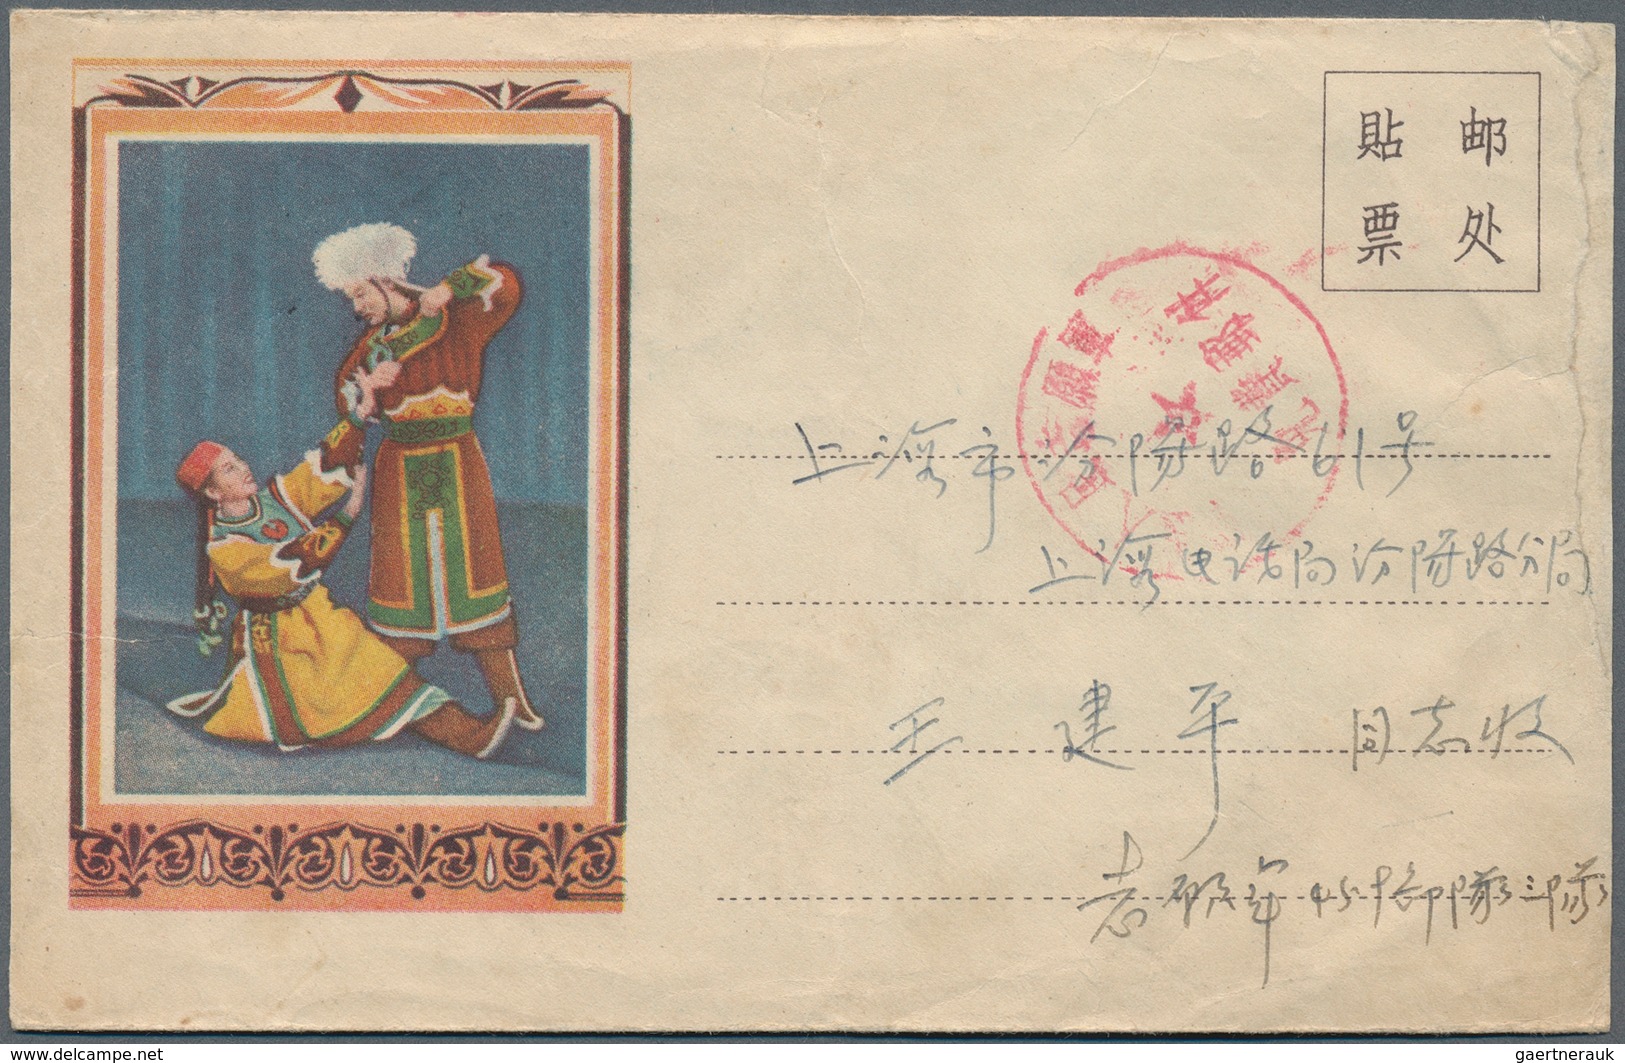 23362 Korea-Nord: 1954/57, korean war, chinese volunteer corps field post envelopes (8, two are pictorial)